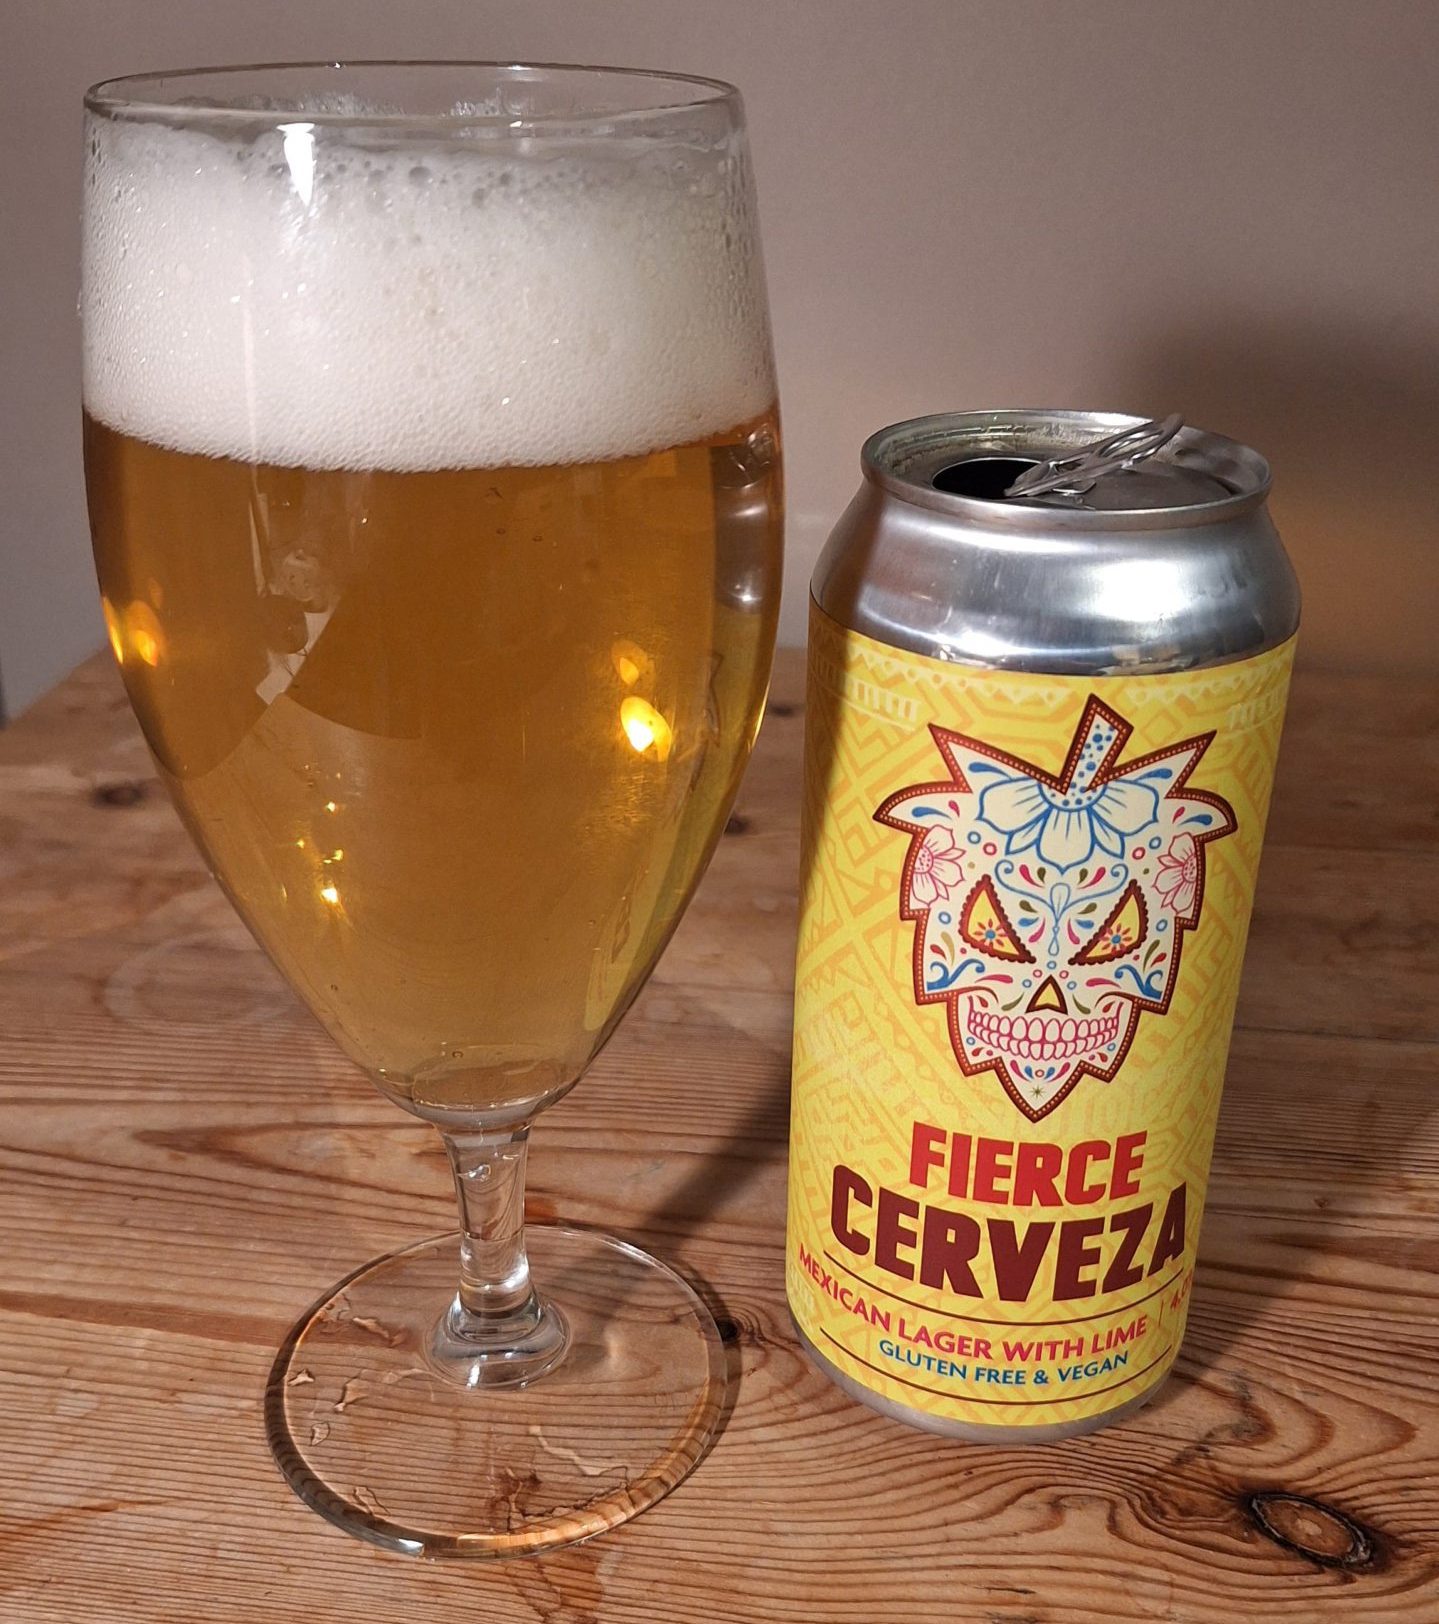 Fierce Beer's Cerveza poured into a glass. 